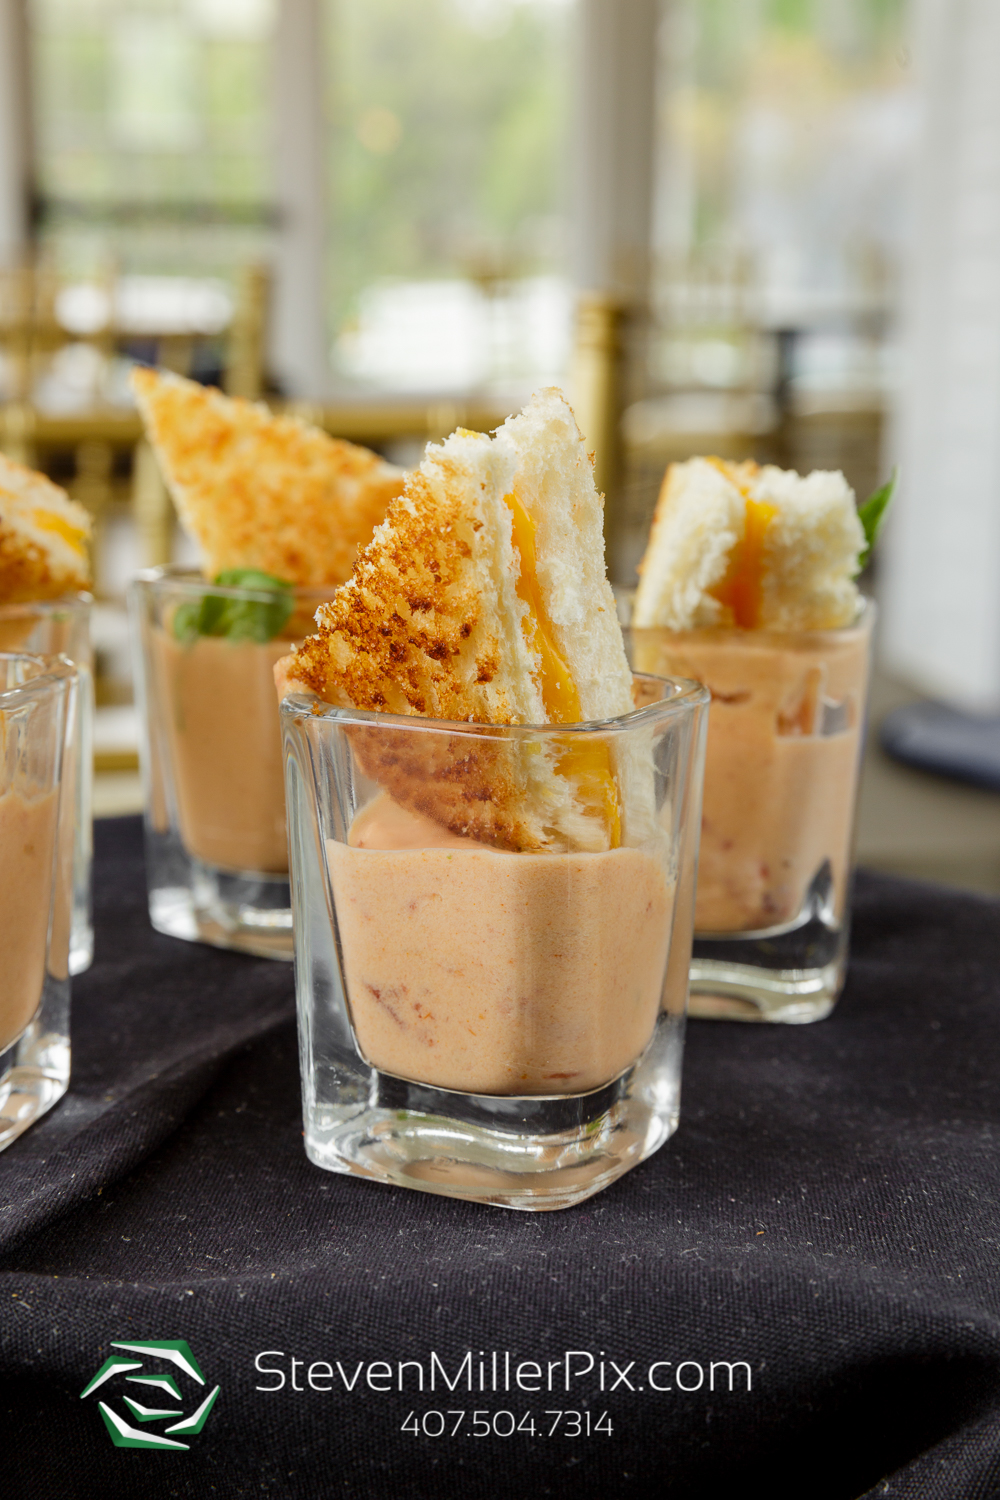 orlando catering - Tomato Soup Shots with Grilled Cheese